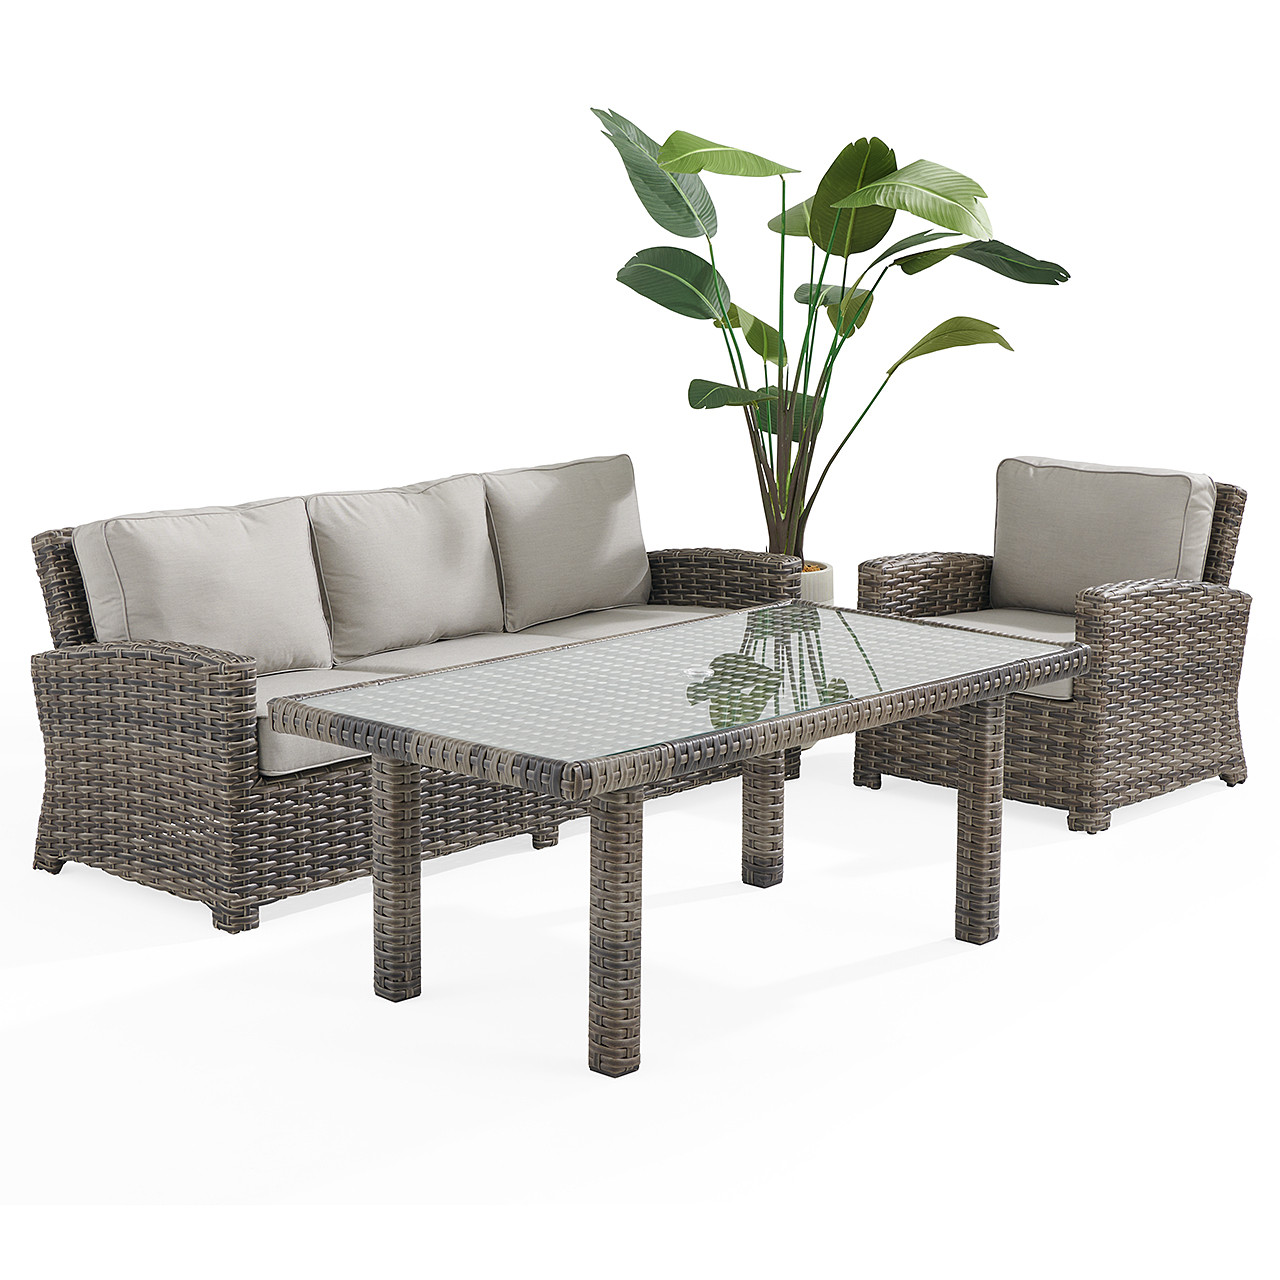 Contempo Husk Outdoor Wicker with Cushions 3 Piece Sofa Group + 65 x 34 in. Lounge Dining Table